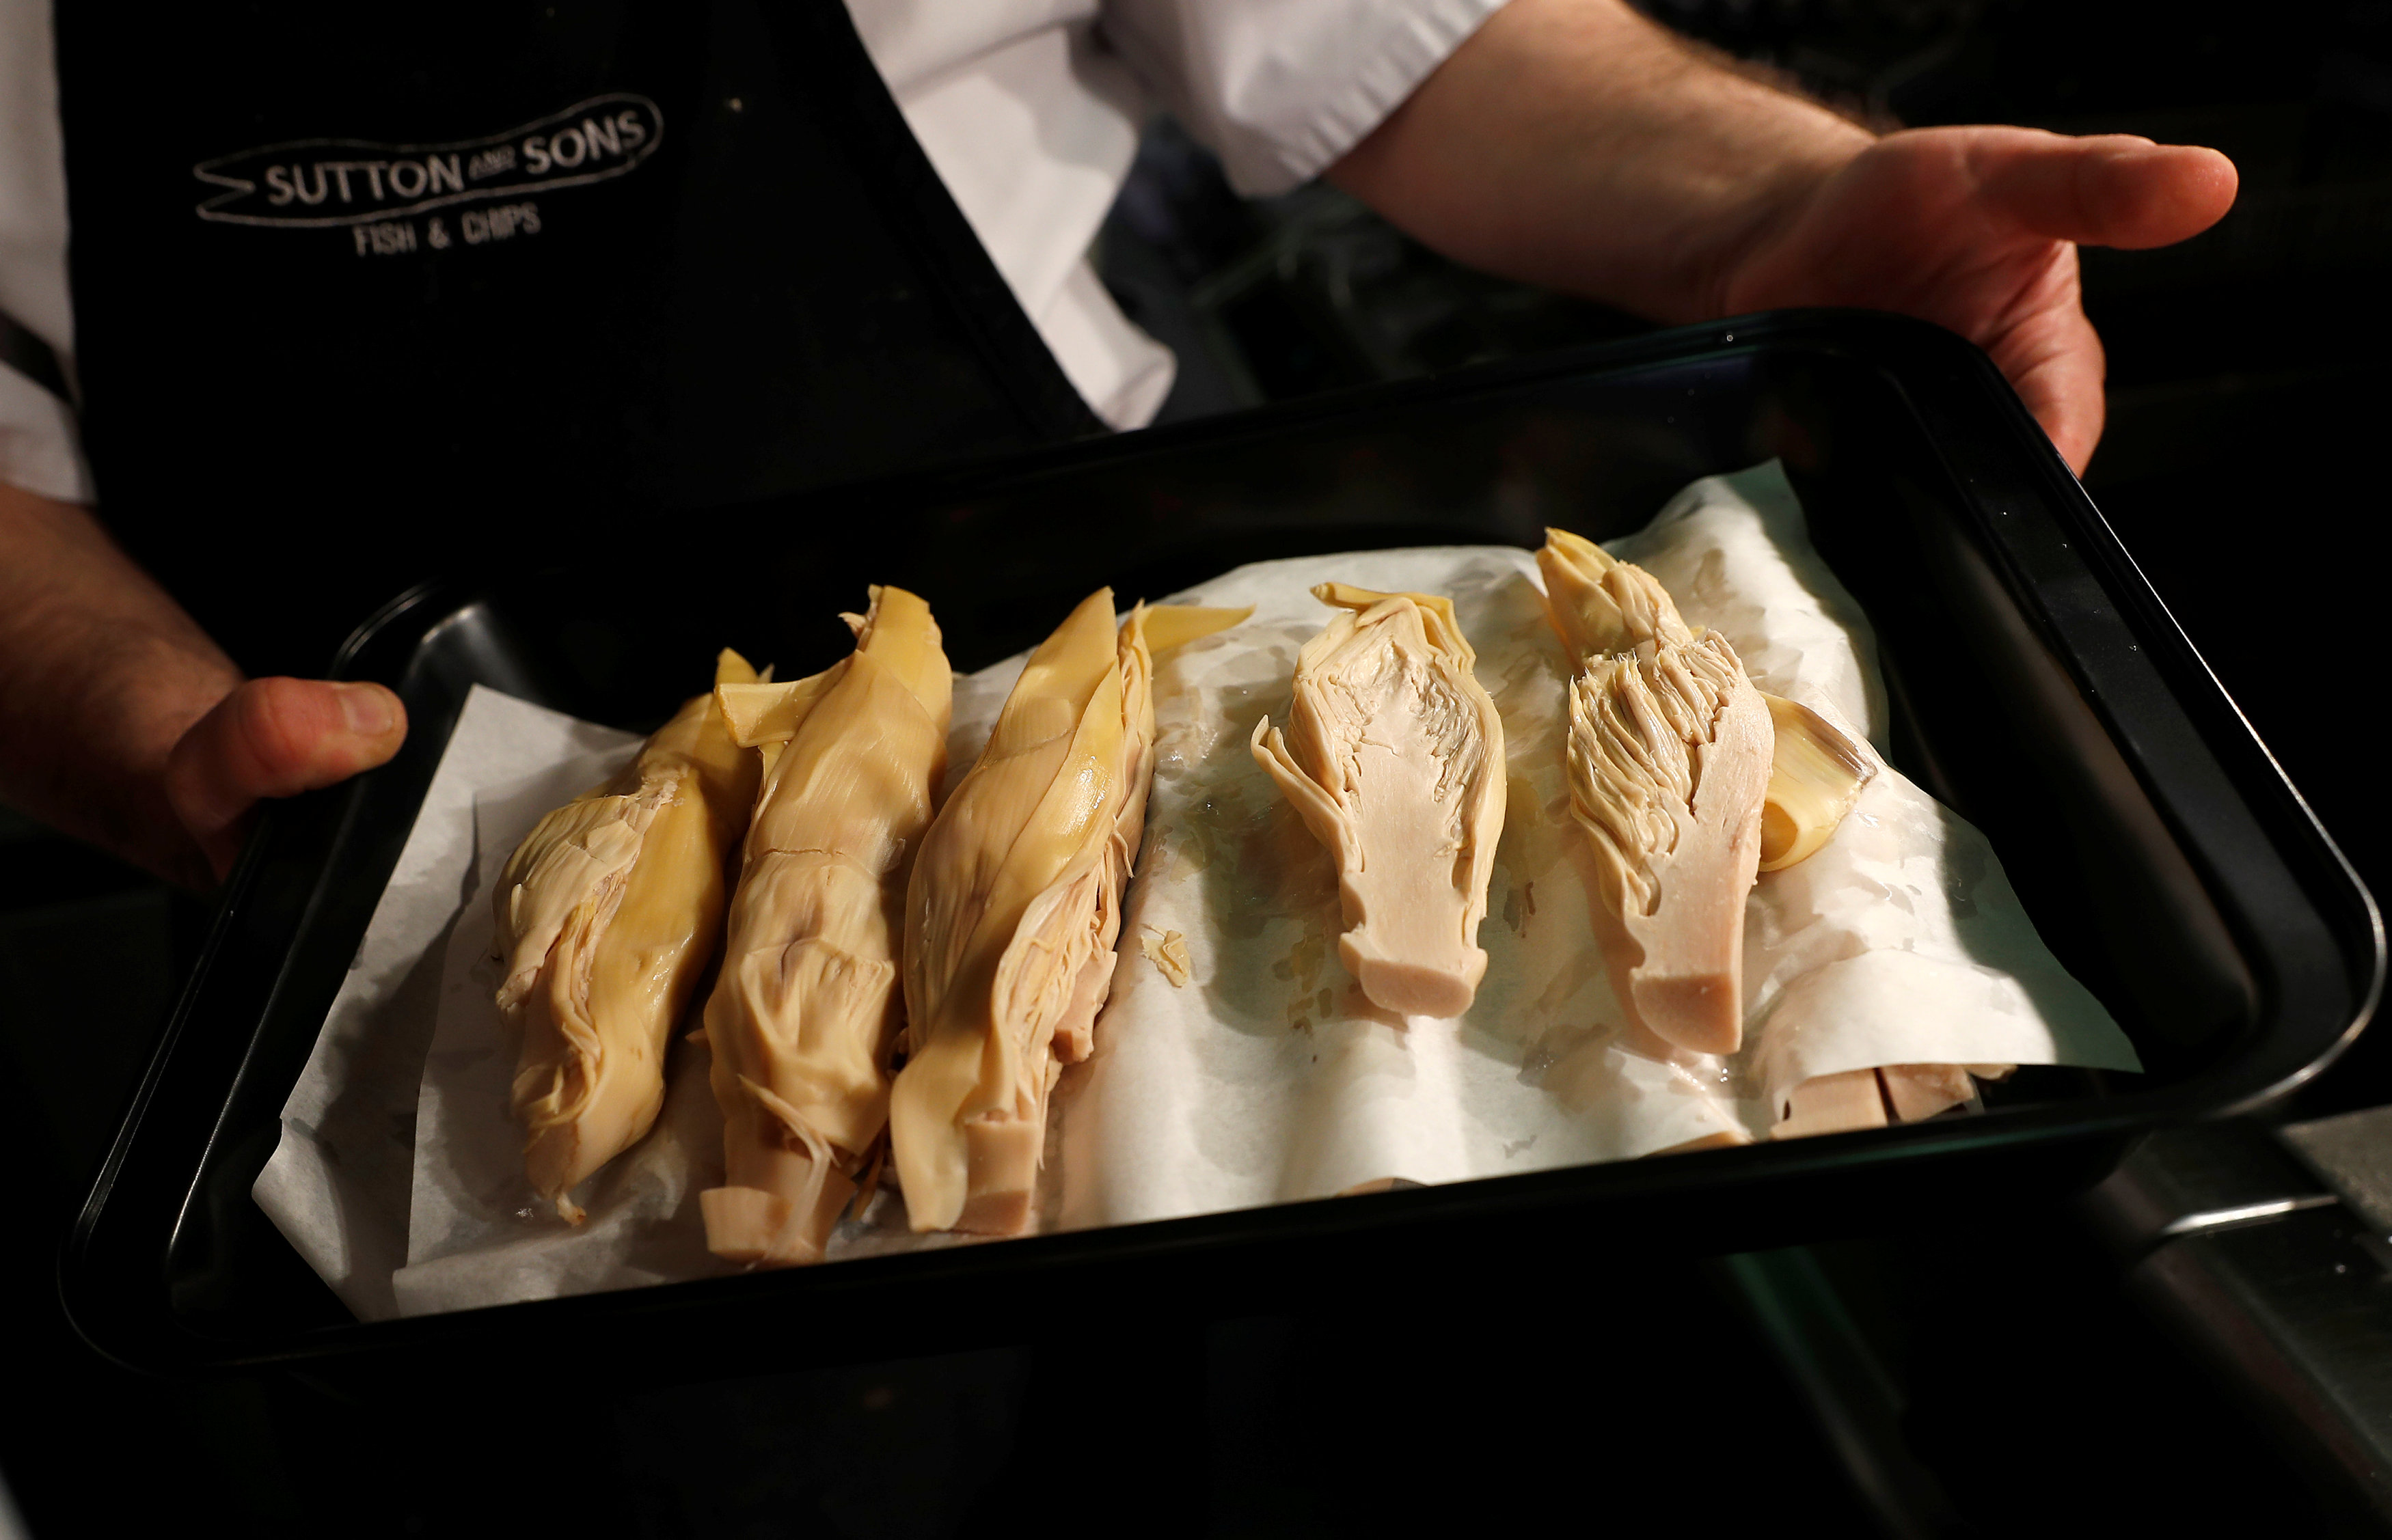 Portions of Banana Blossom are prepared before cooking, in Sutton and Sons vegan fish and chip restaurant in Hackney, London